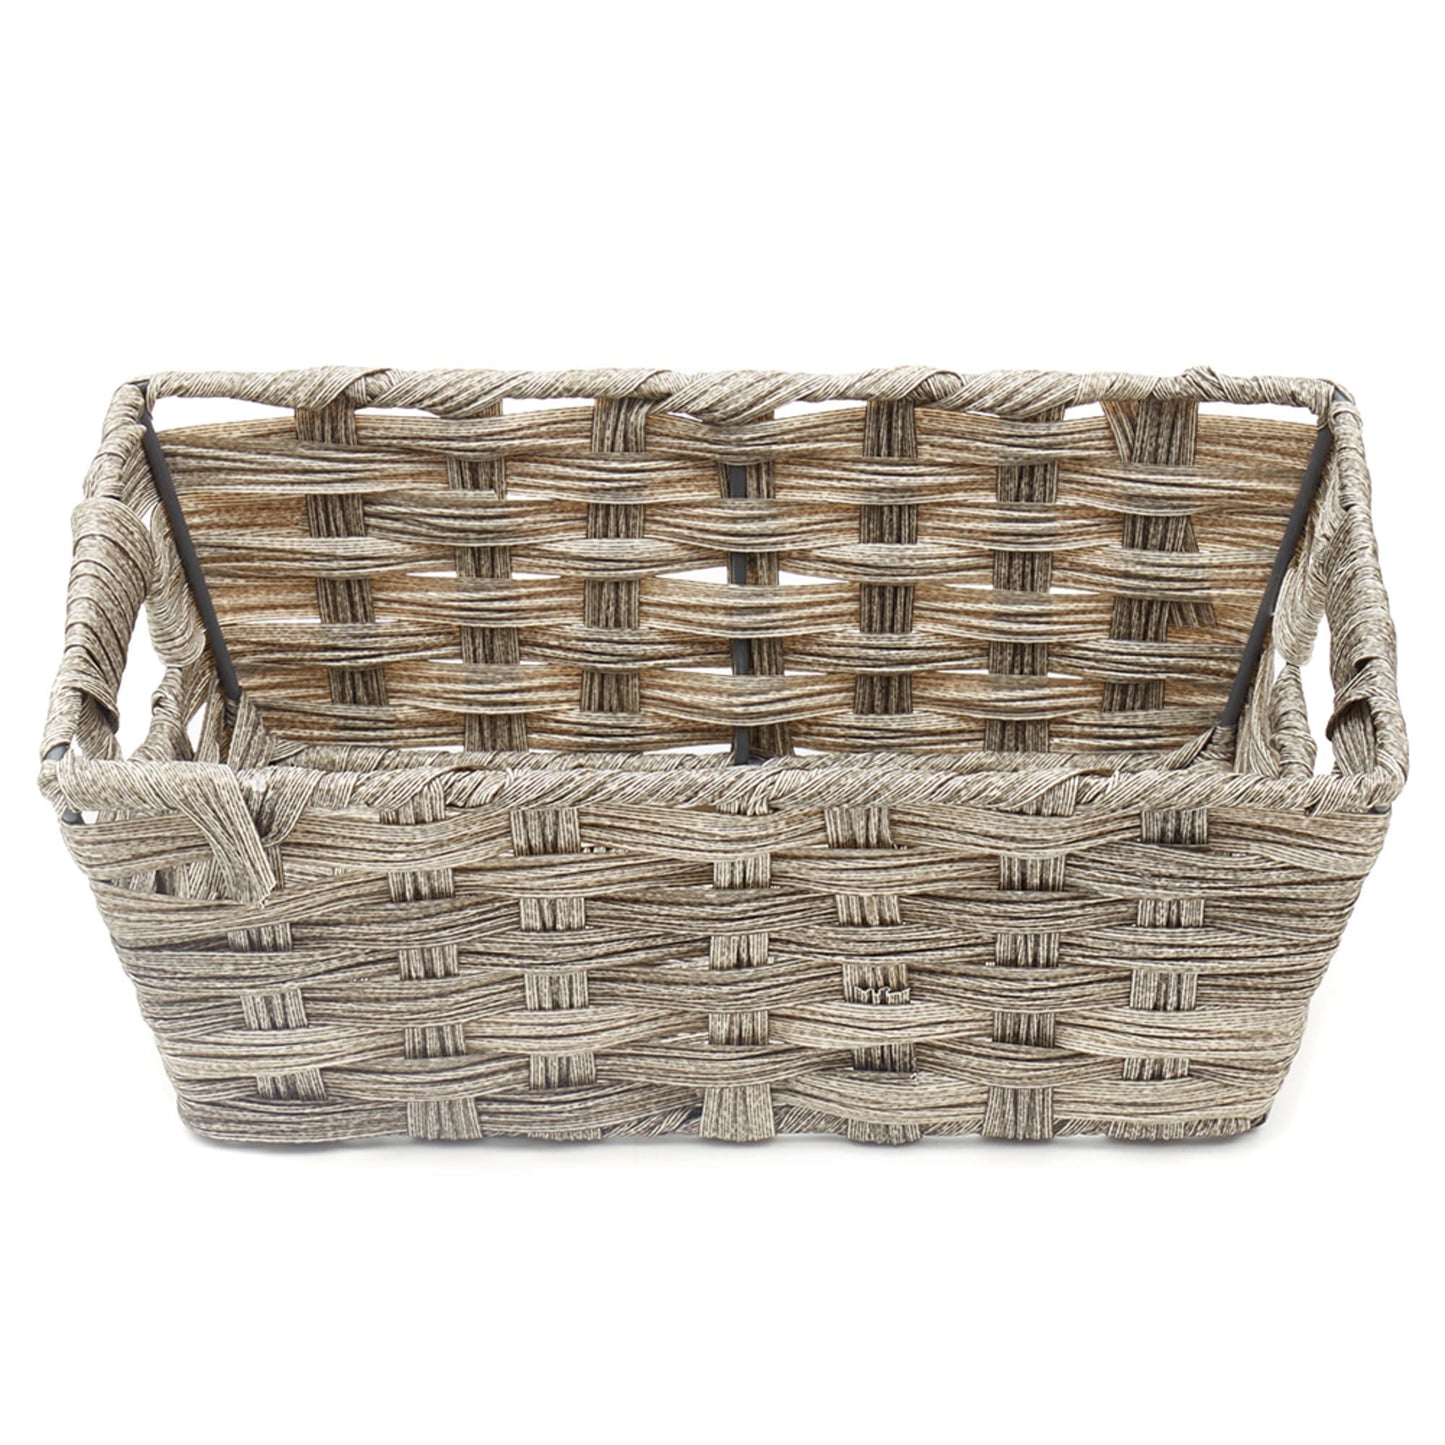 Small Faux Rattan Basket with Cut-out Handles, Grey